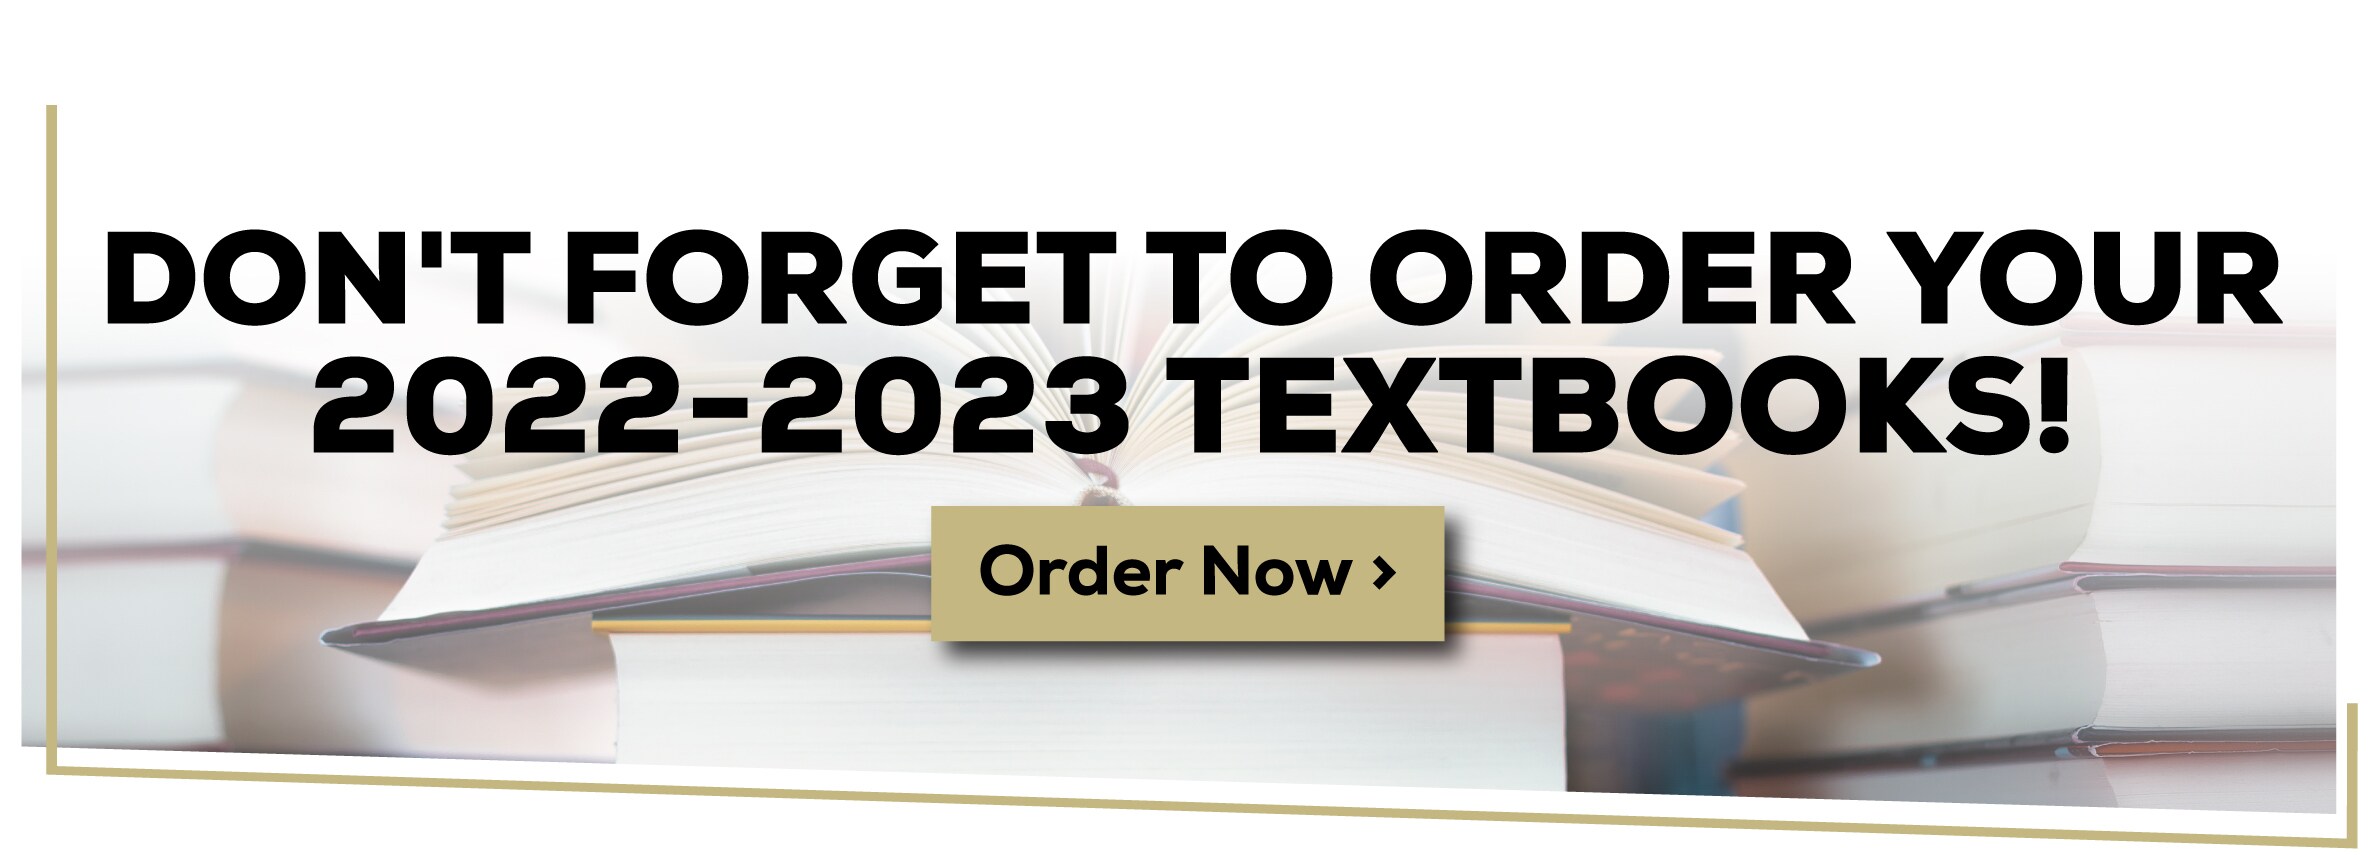 Don't forget to order your 2022-2023 textbooks! Order Now!